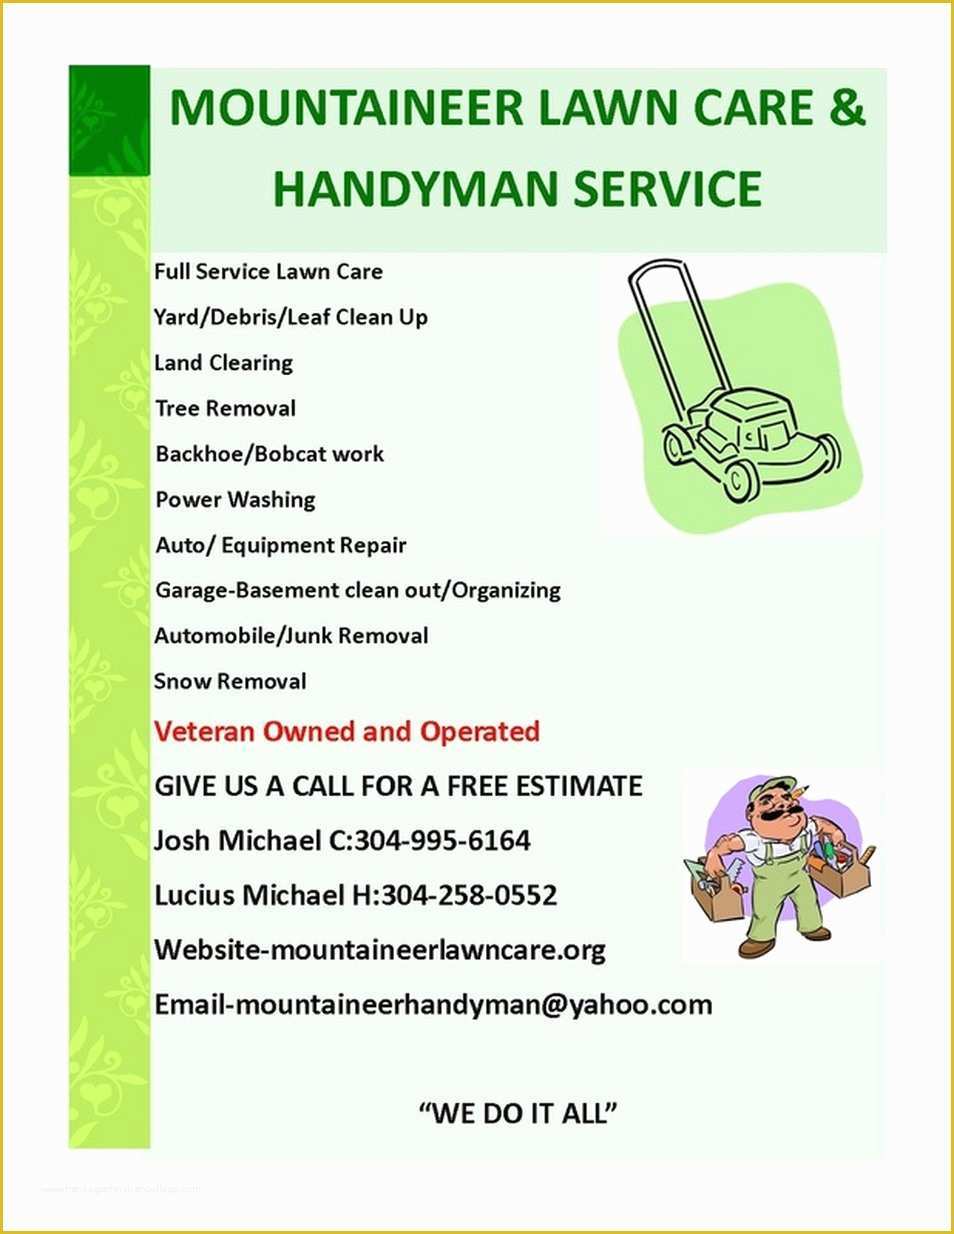 Free Lawn Mowing Service Flyer Template Of High Quality Lawn Care Flyer 2 Lawn Care Service Flyer